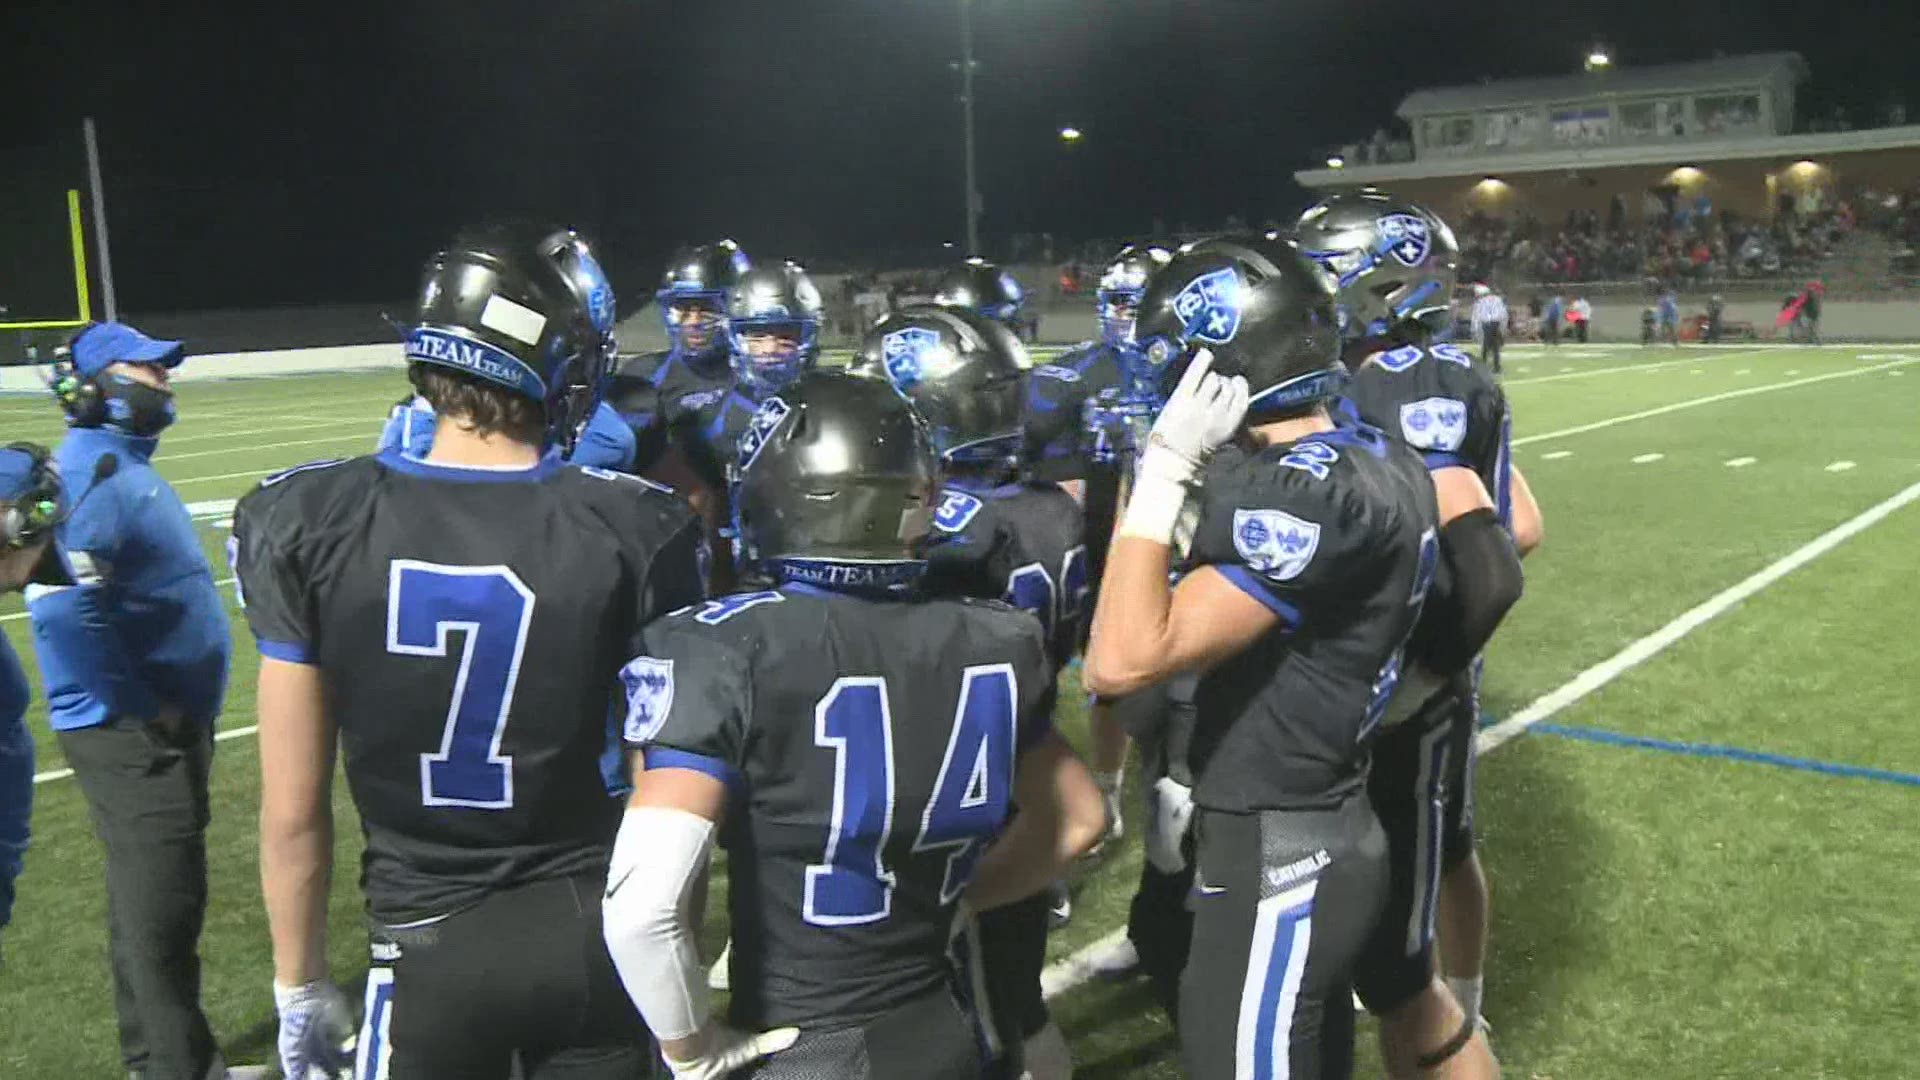 Highlights from the match-up between Grand Rapids Catholic Central vs. Belding.